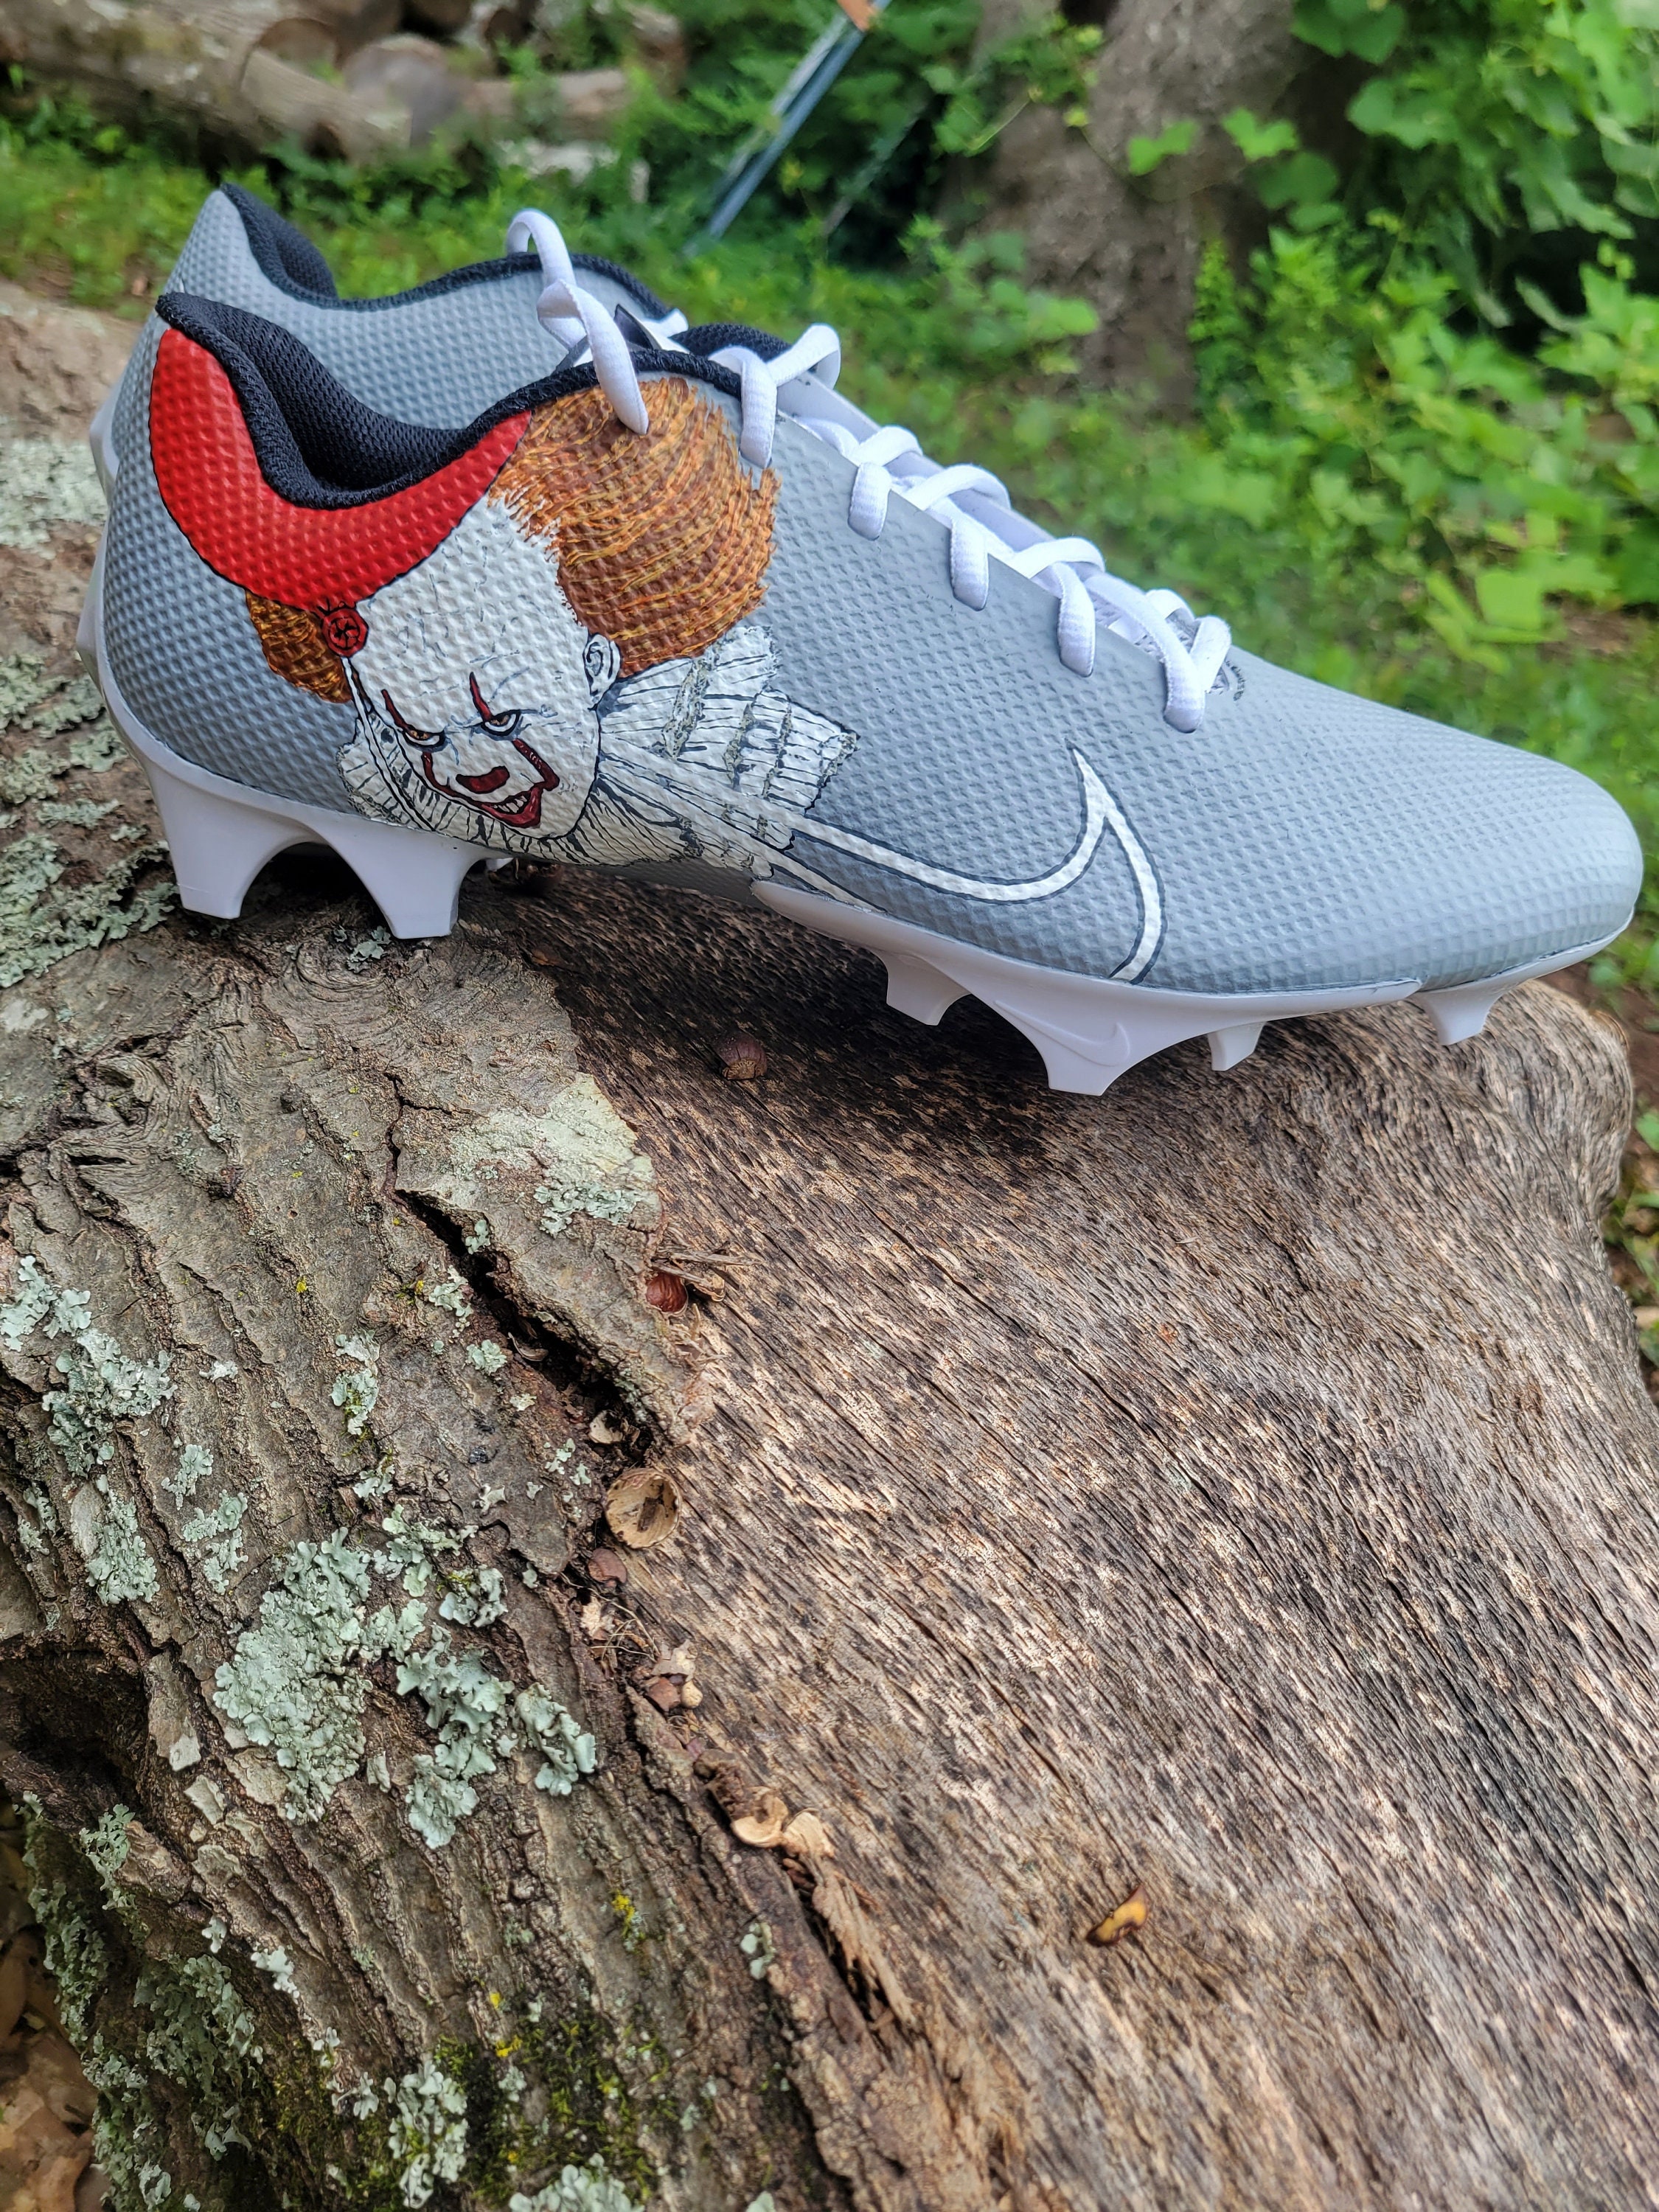 Nike Ghost Face Football Cleats